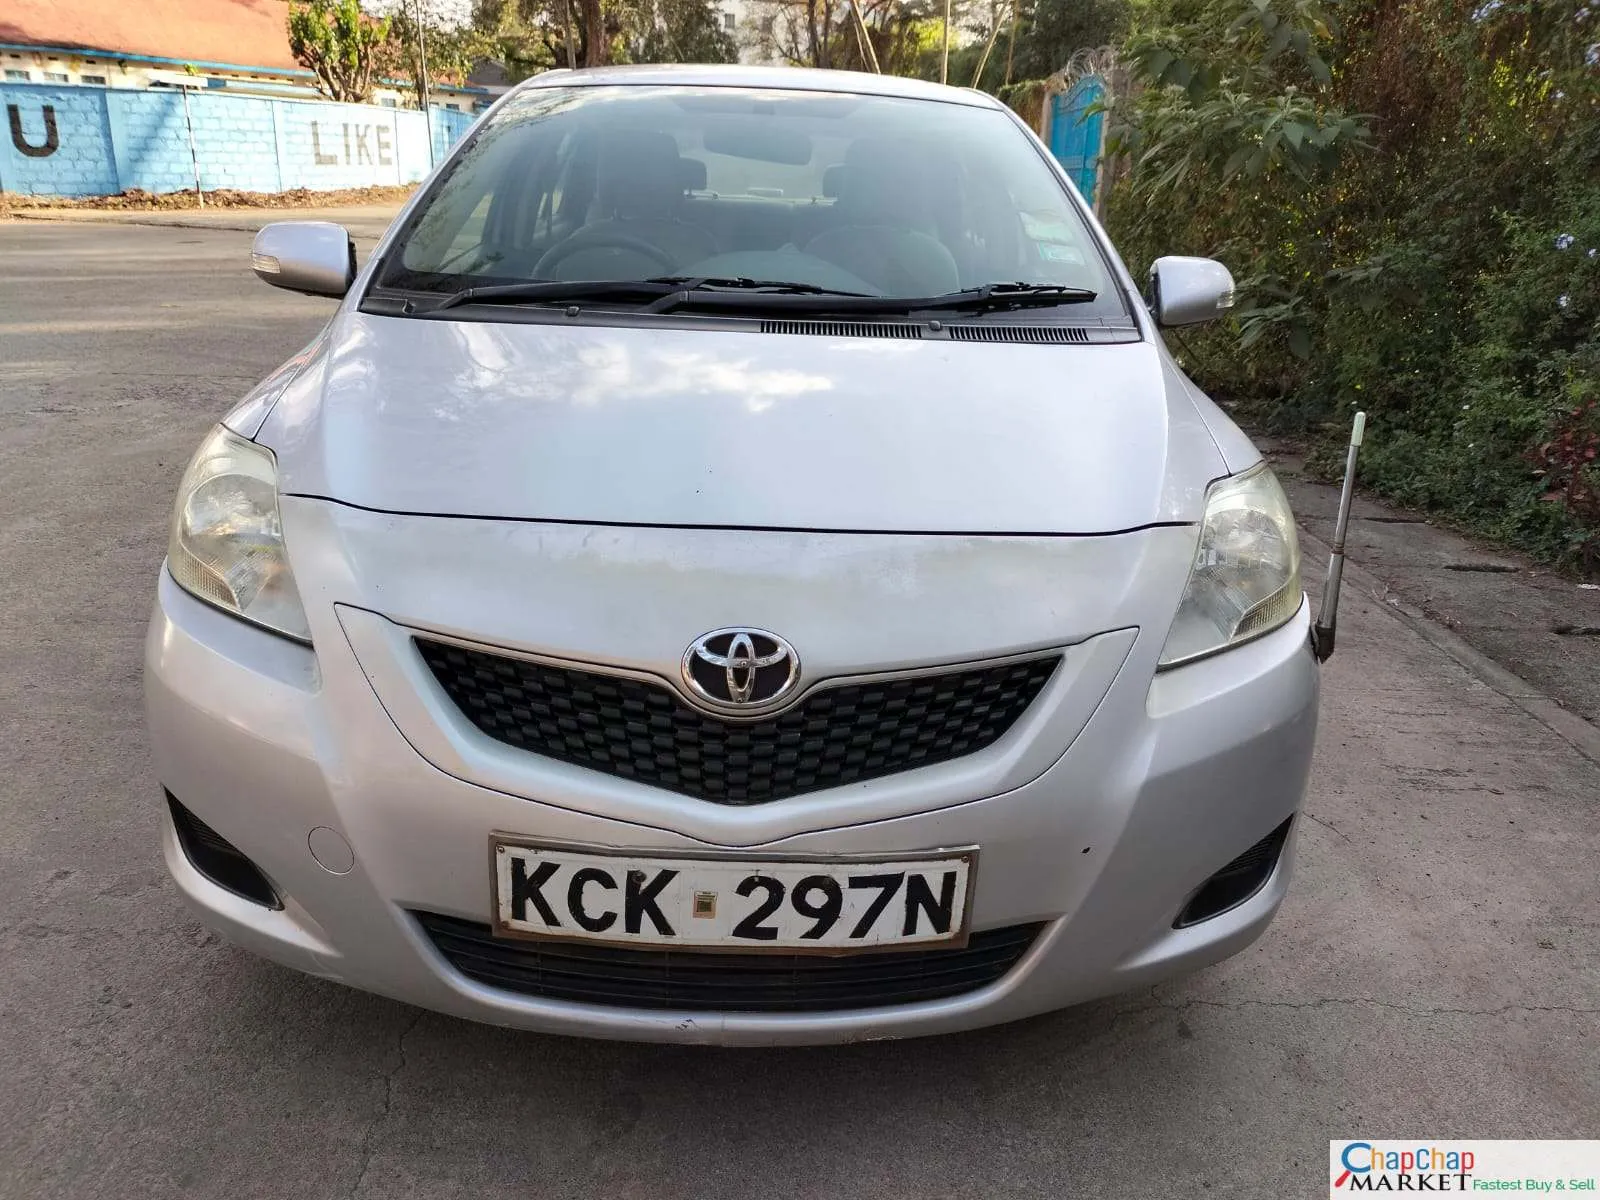 Toyota BELTA kenya 1300cc ONLY You Pay 30% Deposit Trade in OK EXCLUSIVE belta for sale in kenya hire purchase installments